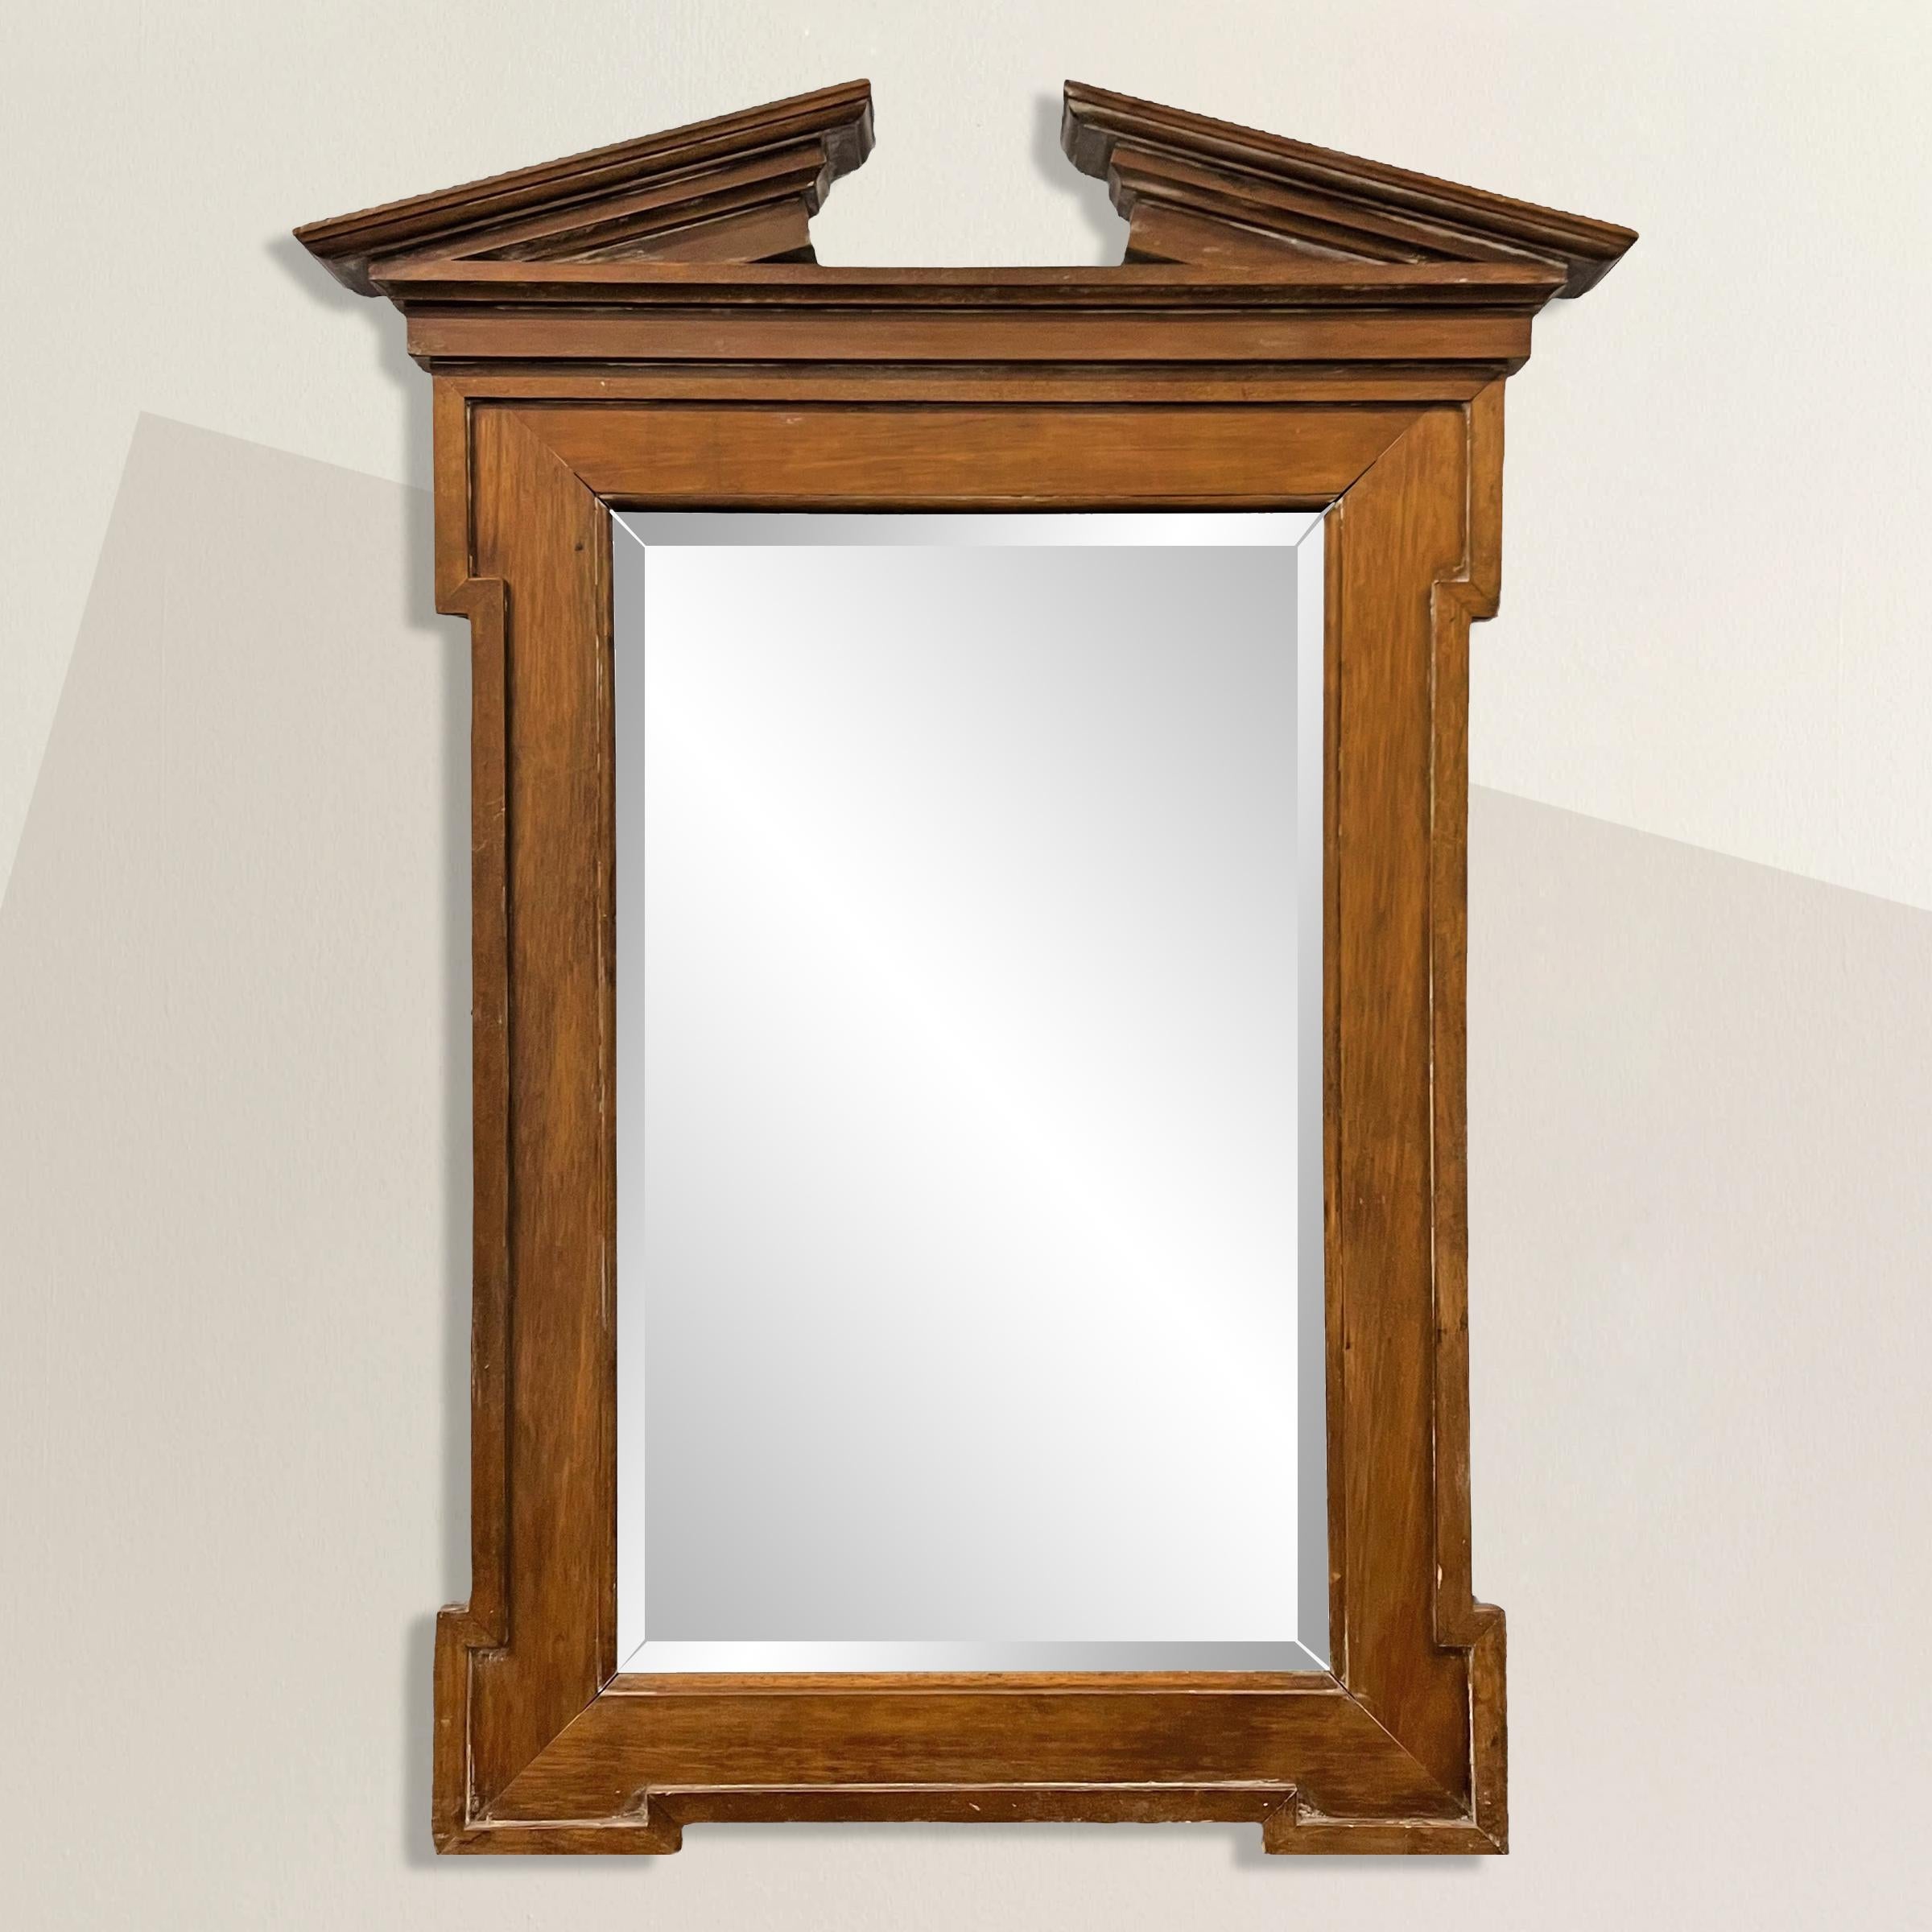 Elevate your interior with timeless elegance using this English Georgian-Style walnut framed mirror featuring a broken pediment inspired by classical architecture. Its wide frame, accentuated by wider square corners, exudes sophistication and